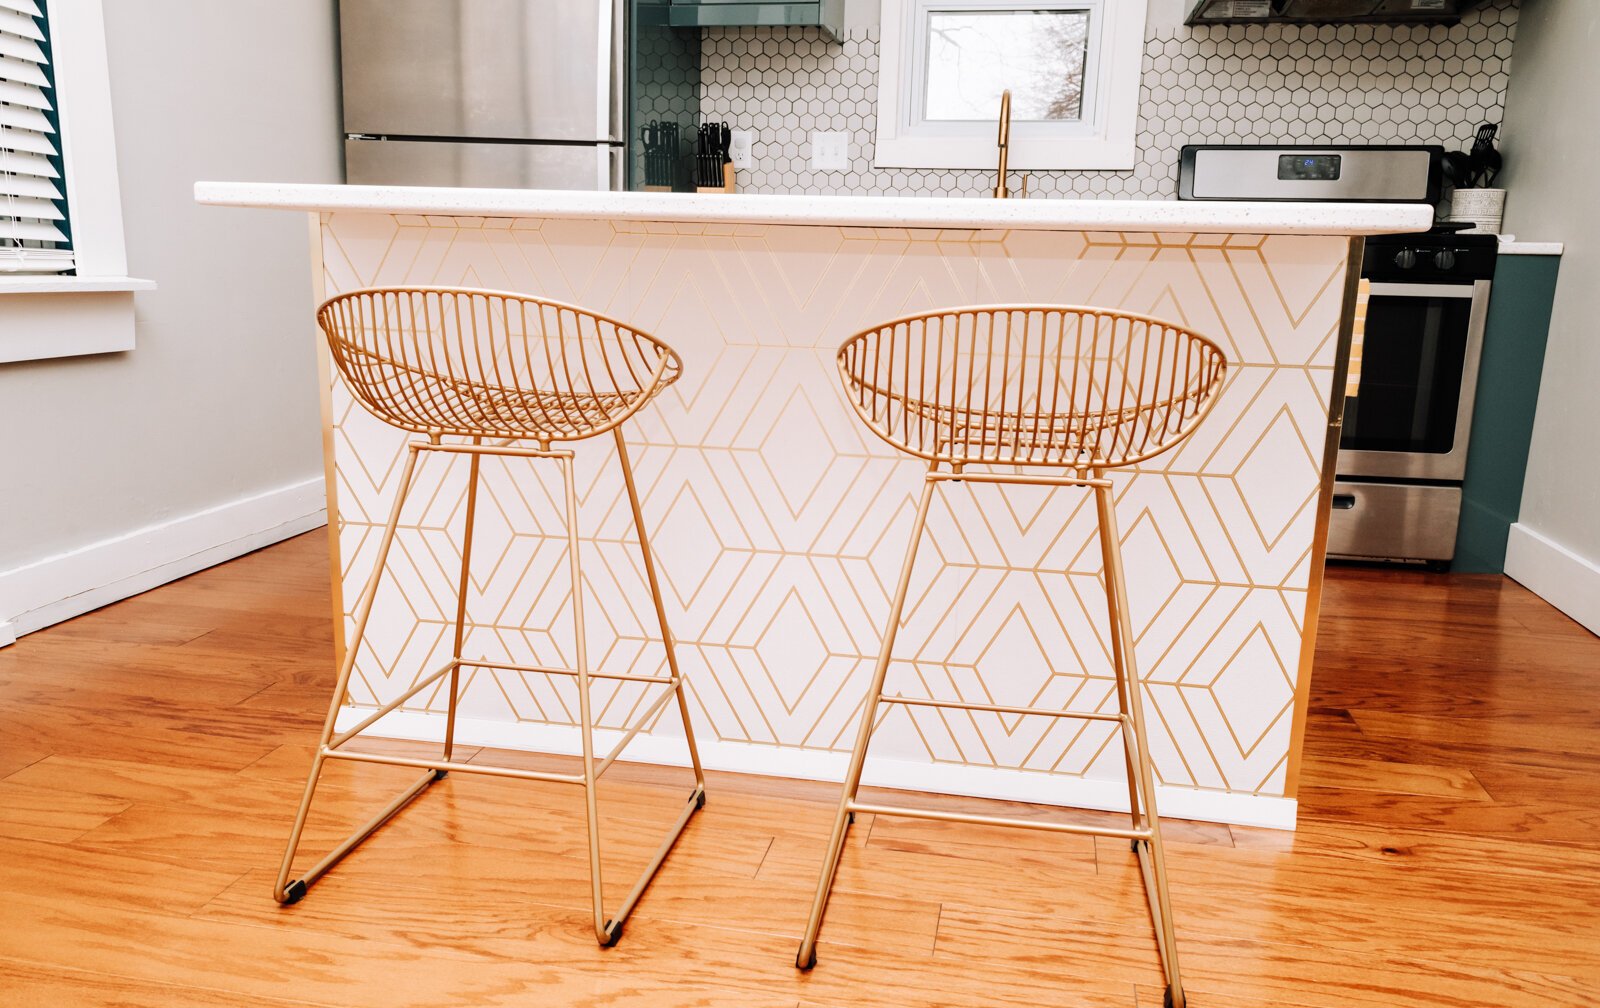 The addition of wallpaper on the island creates a pattern backdrop to the stools.